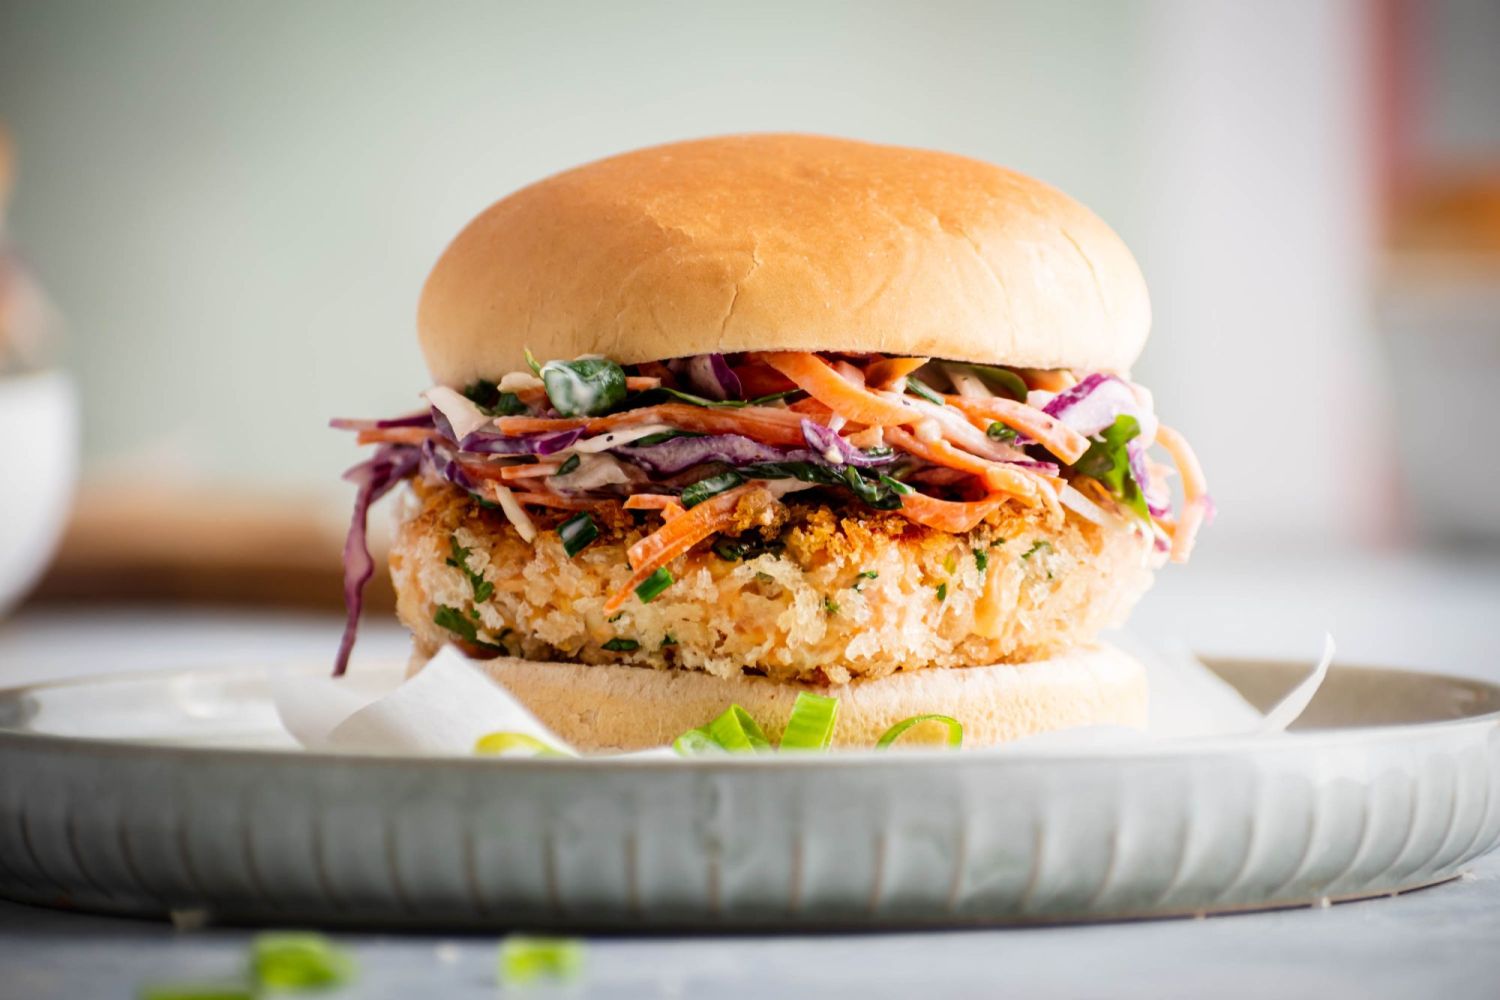 Crispy salmon burgers with cabbage and carrot coleslaw served on a white burger bun.